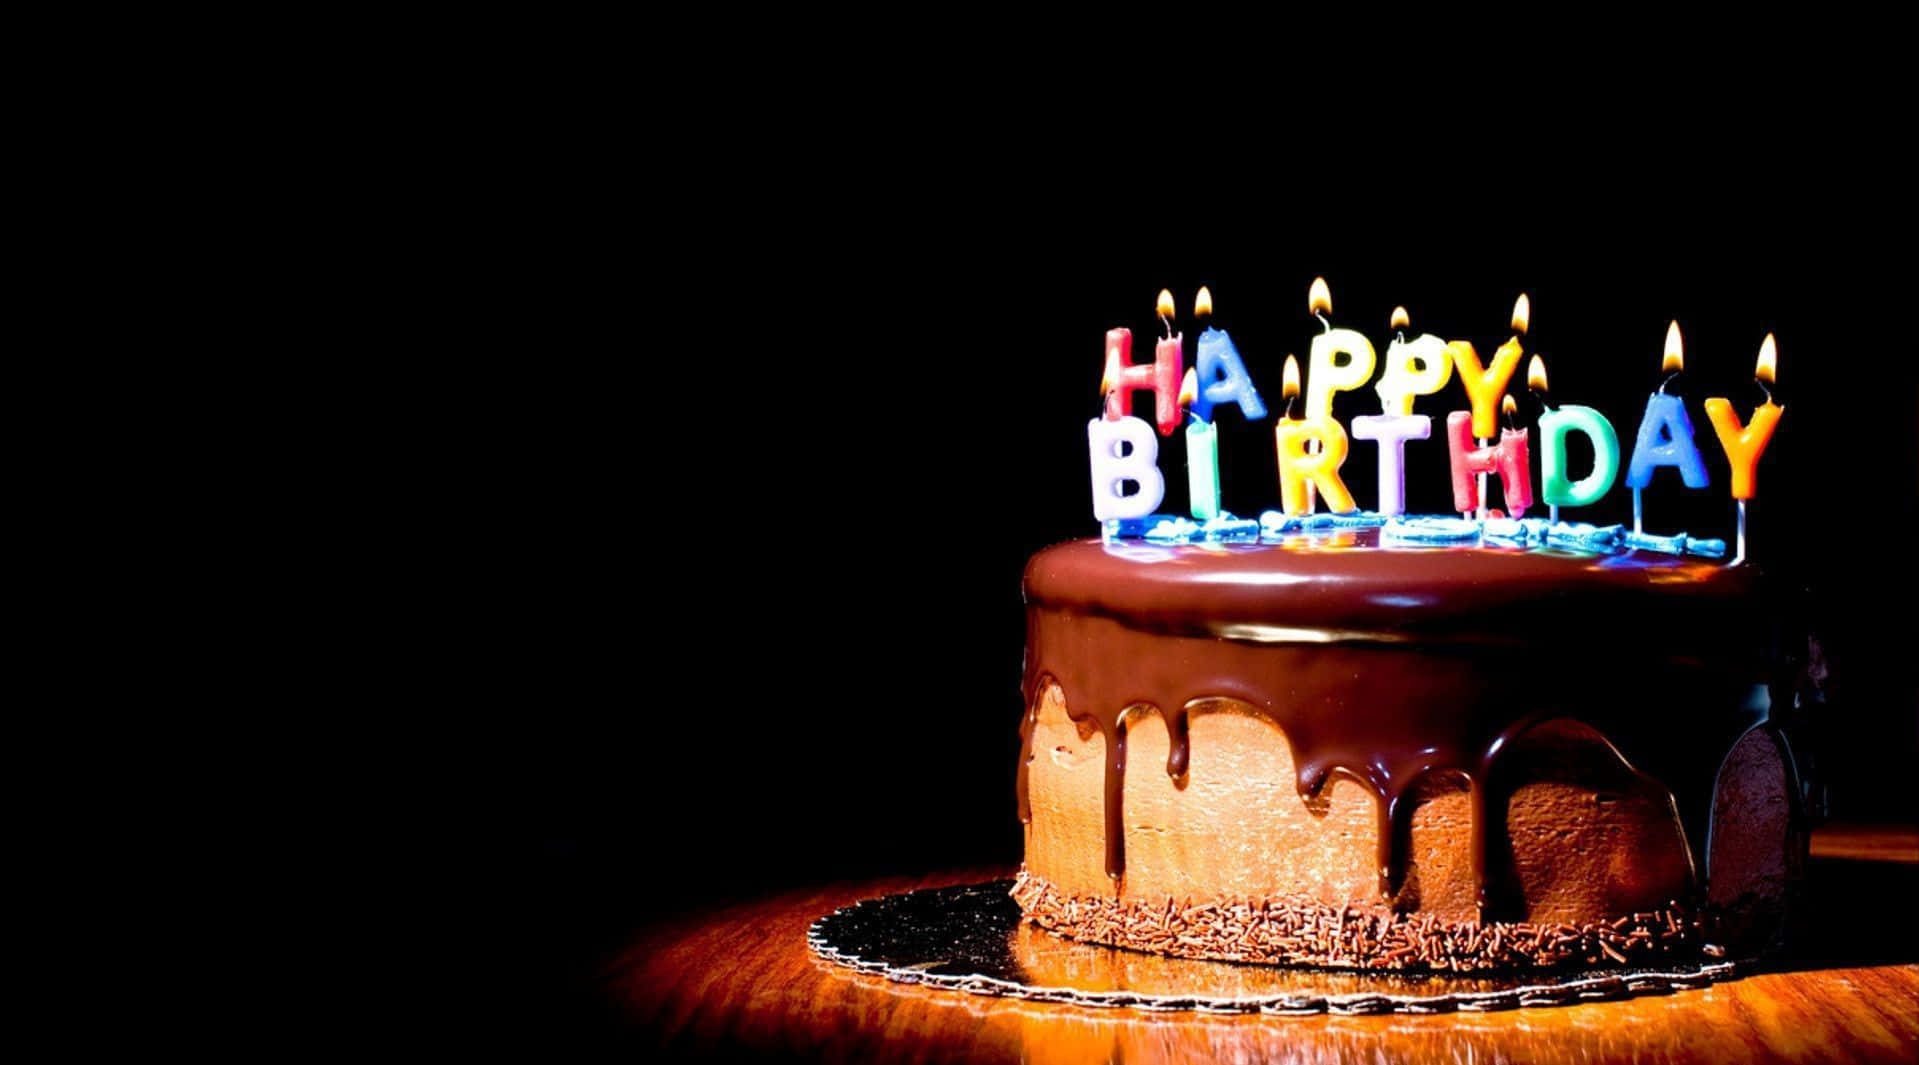 Happy Birthday Cake Hd Wallpapers